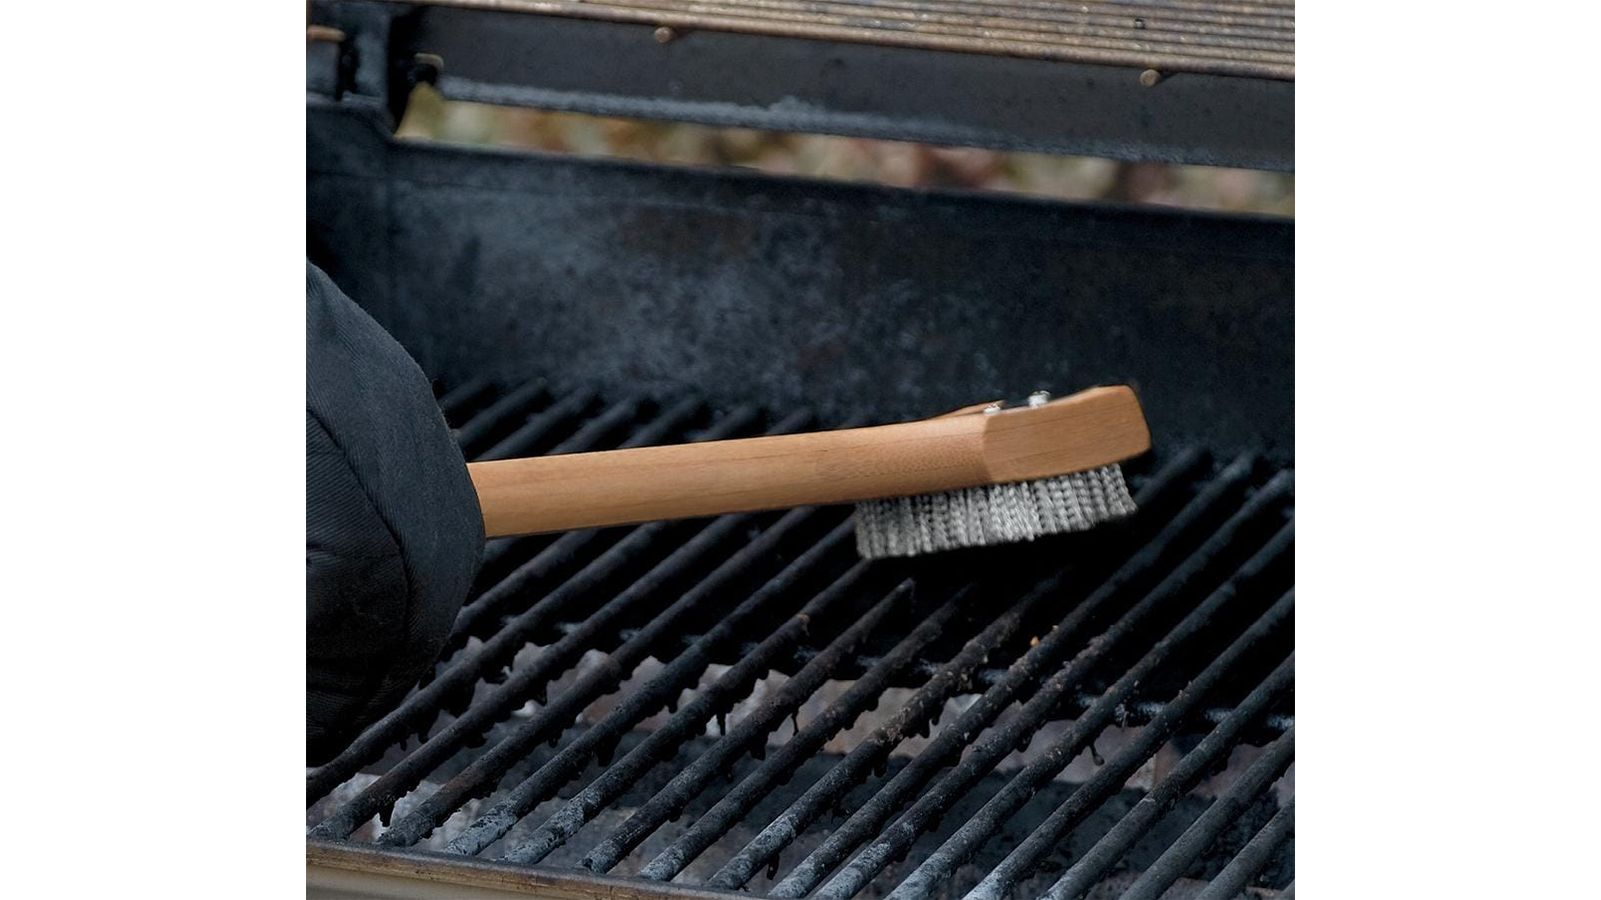 How To Clean Grill Brush The best way to clean you grill for great BBQs this summer | CNN Underscored